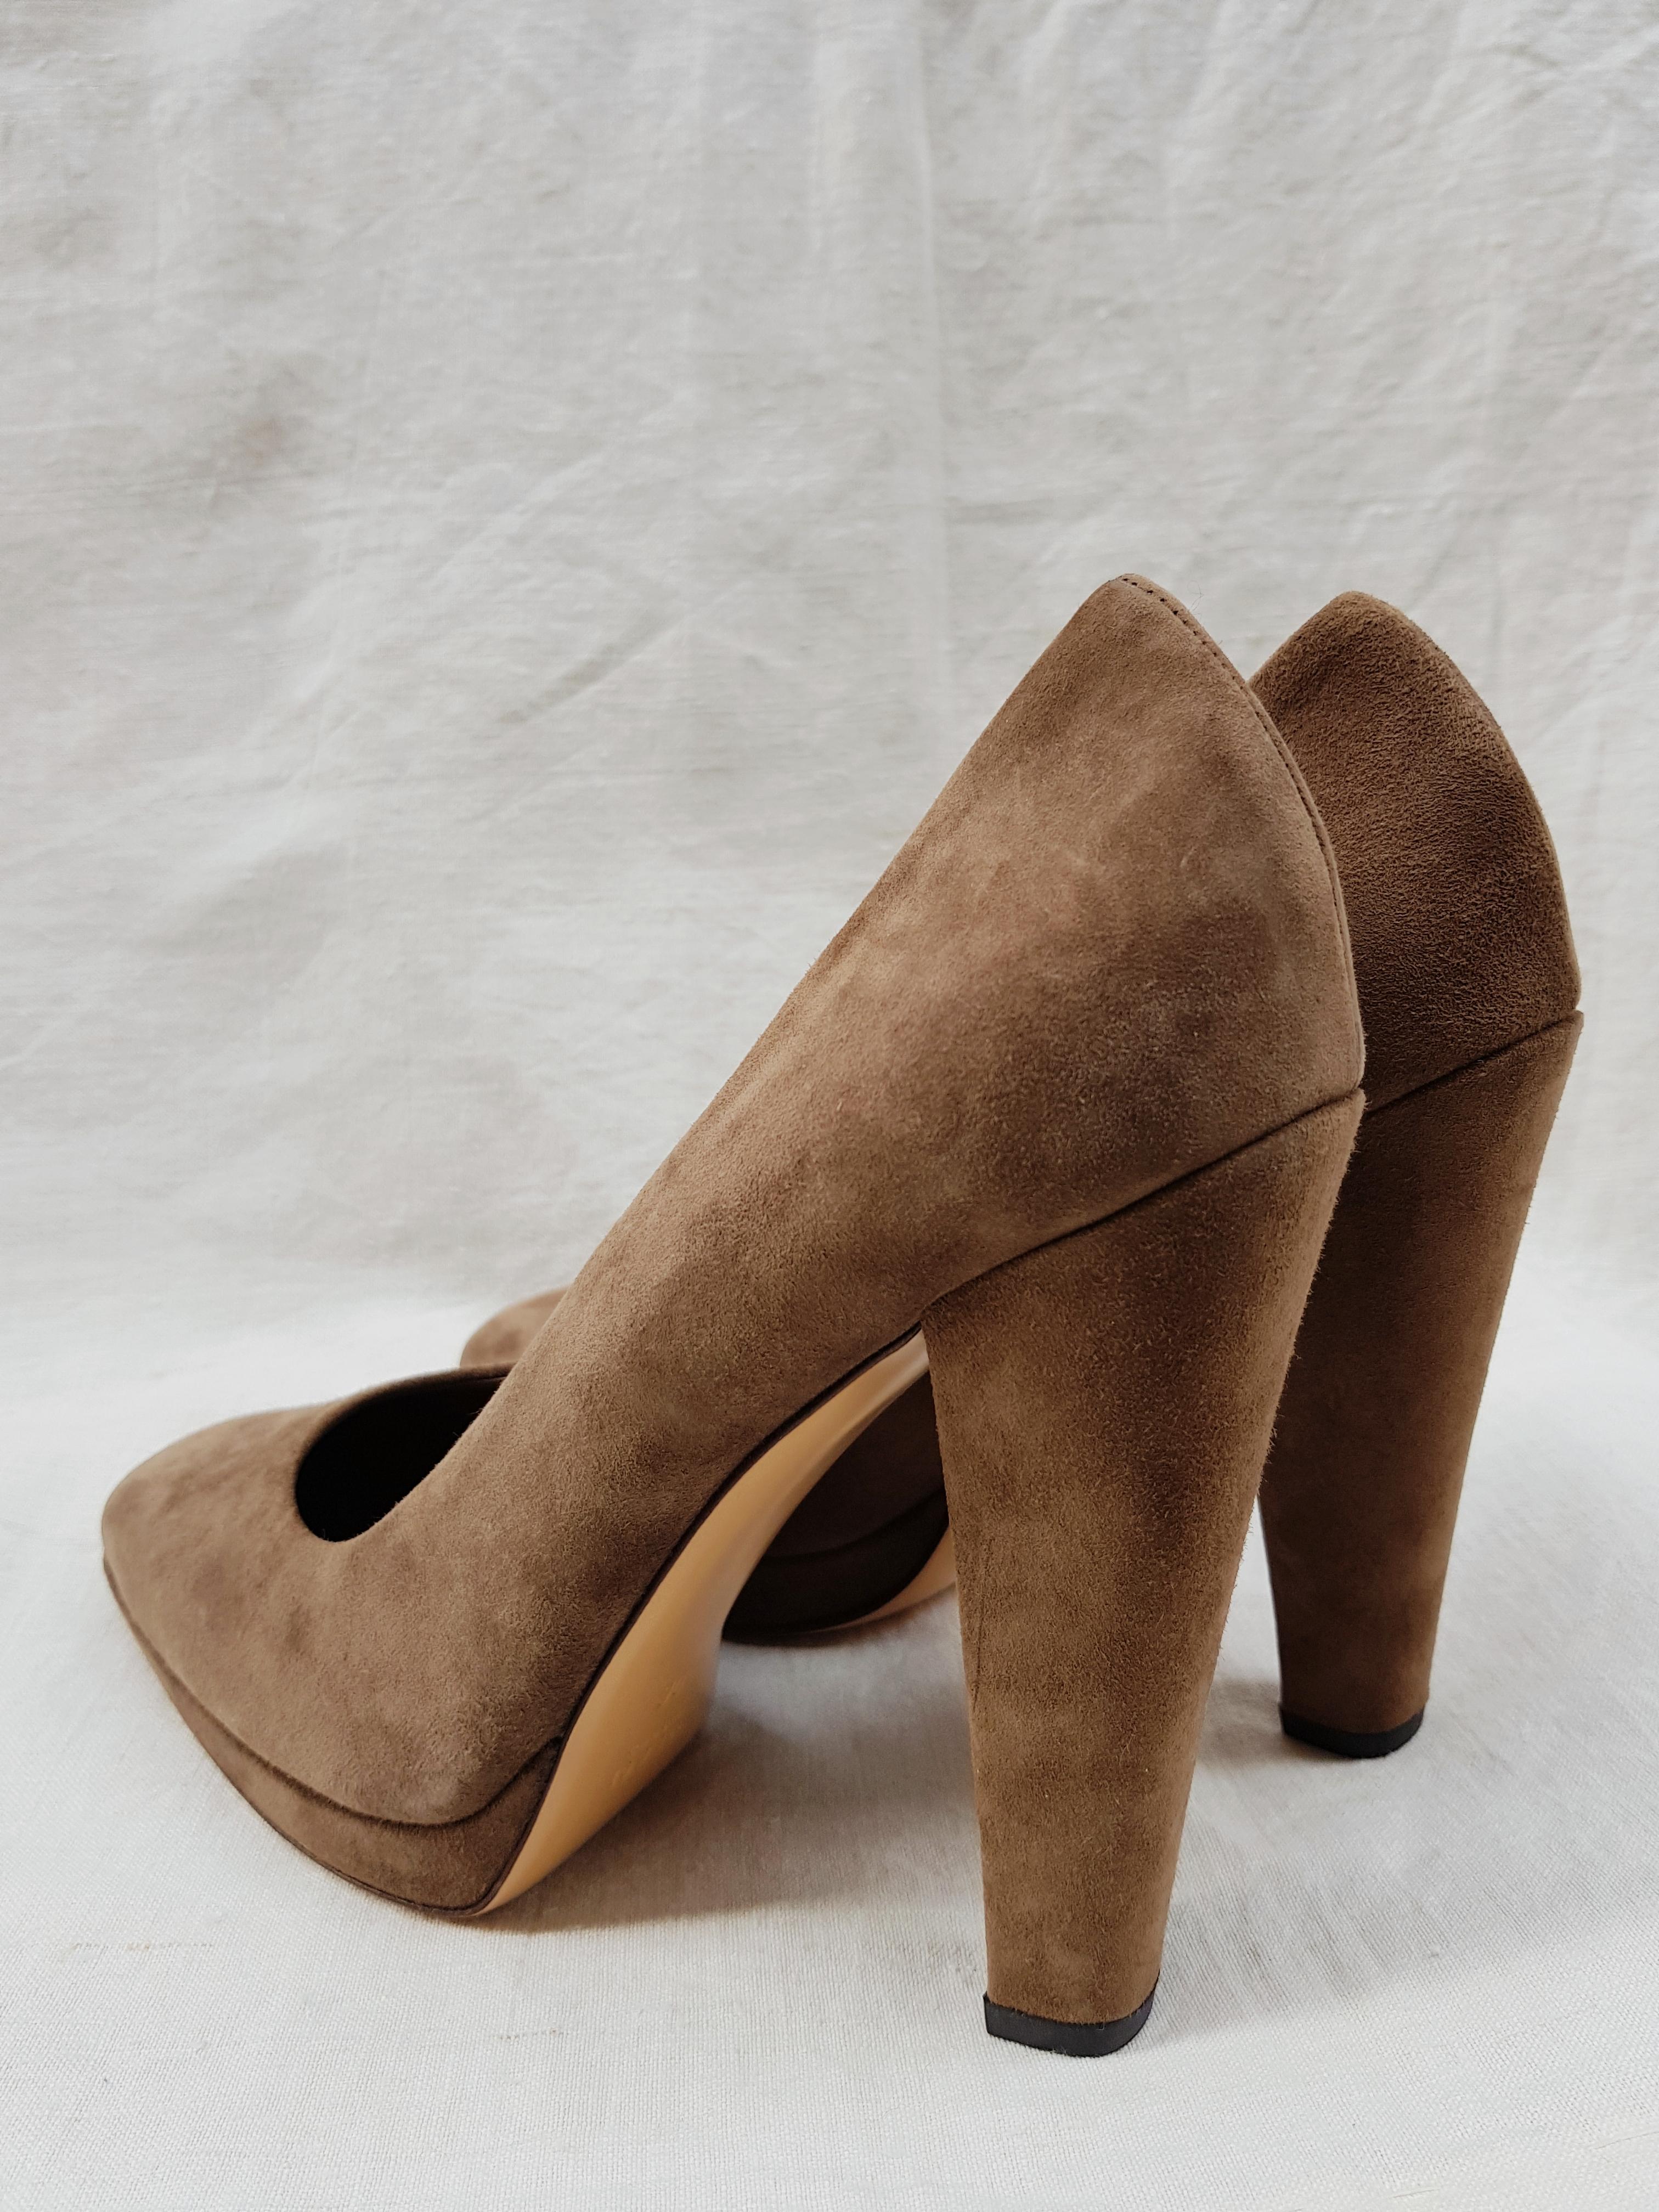 -Suede leather
-Camel color
-Block heels
-125 mm heel
-Sold with dustbag and box
-New condition
-Size 40 FR